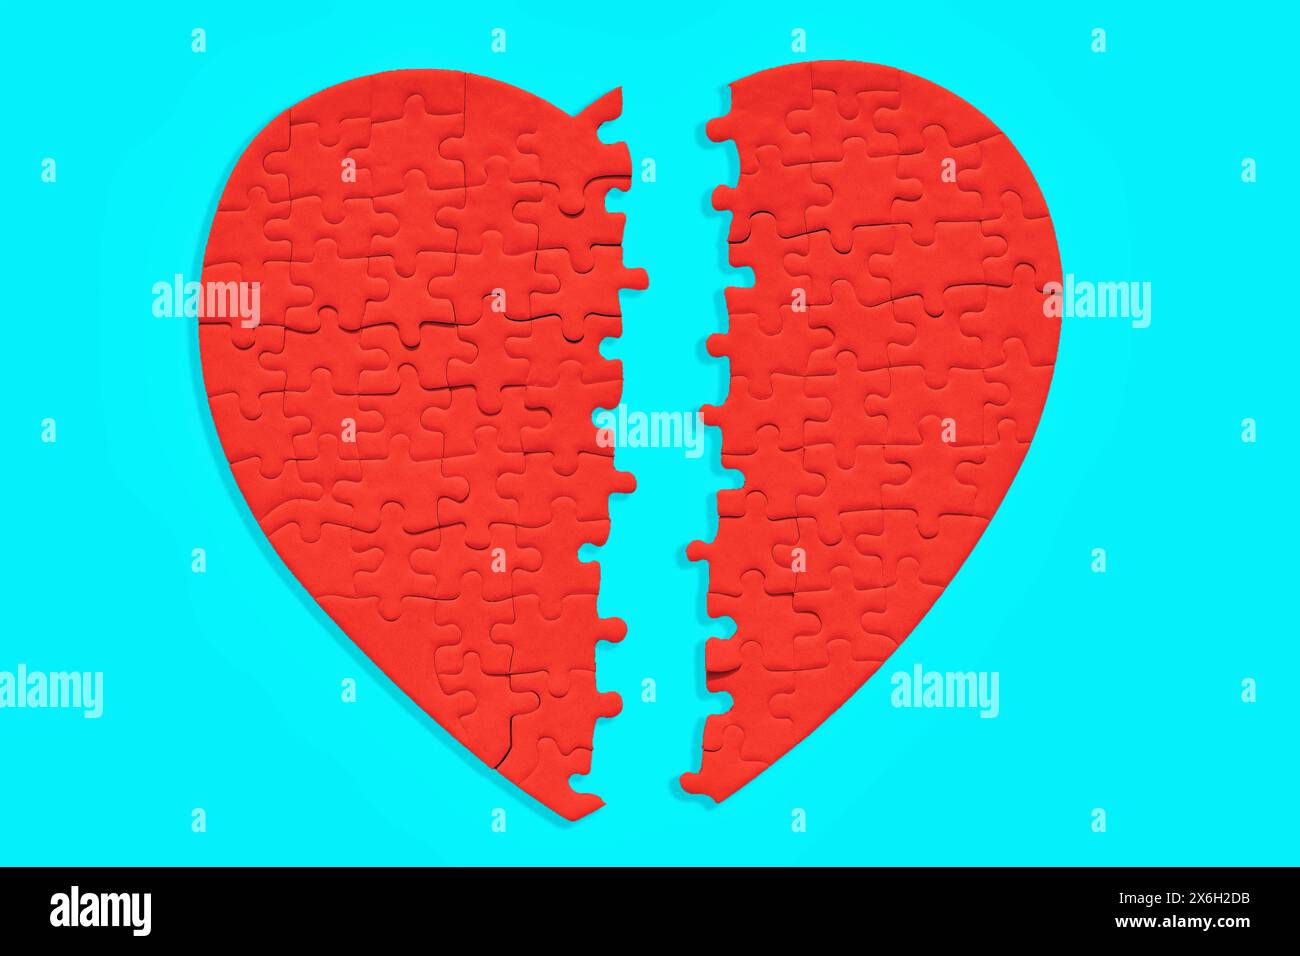 Split red heart jigsaw puzzle, zoomed in, on a light blue background. Relationships difficulties related concept. Stock Photo